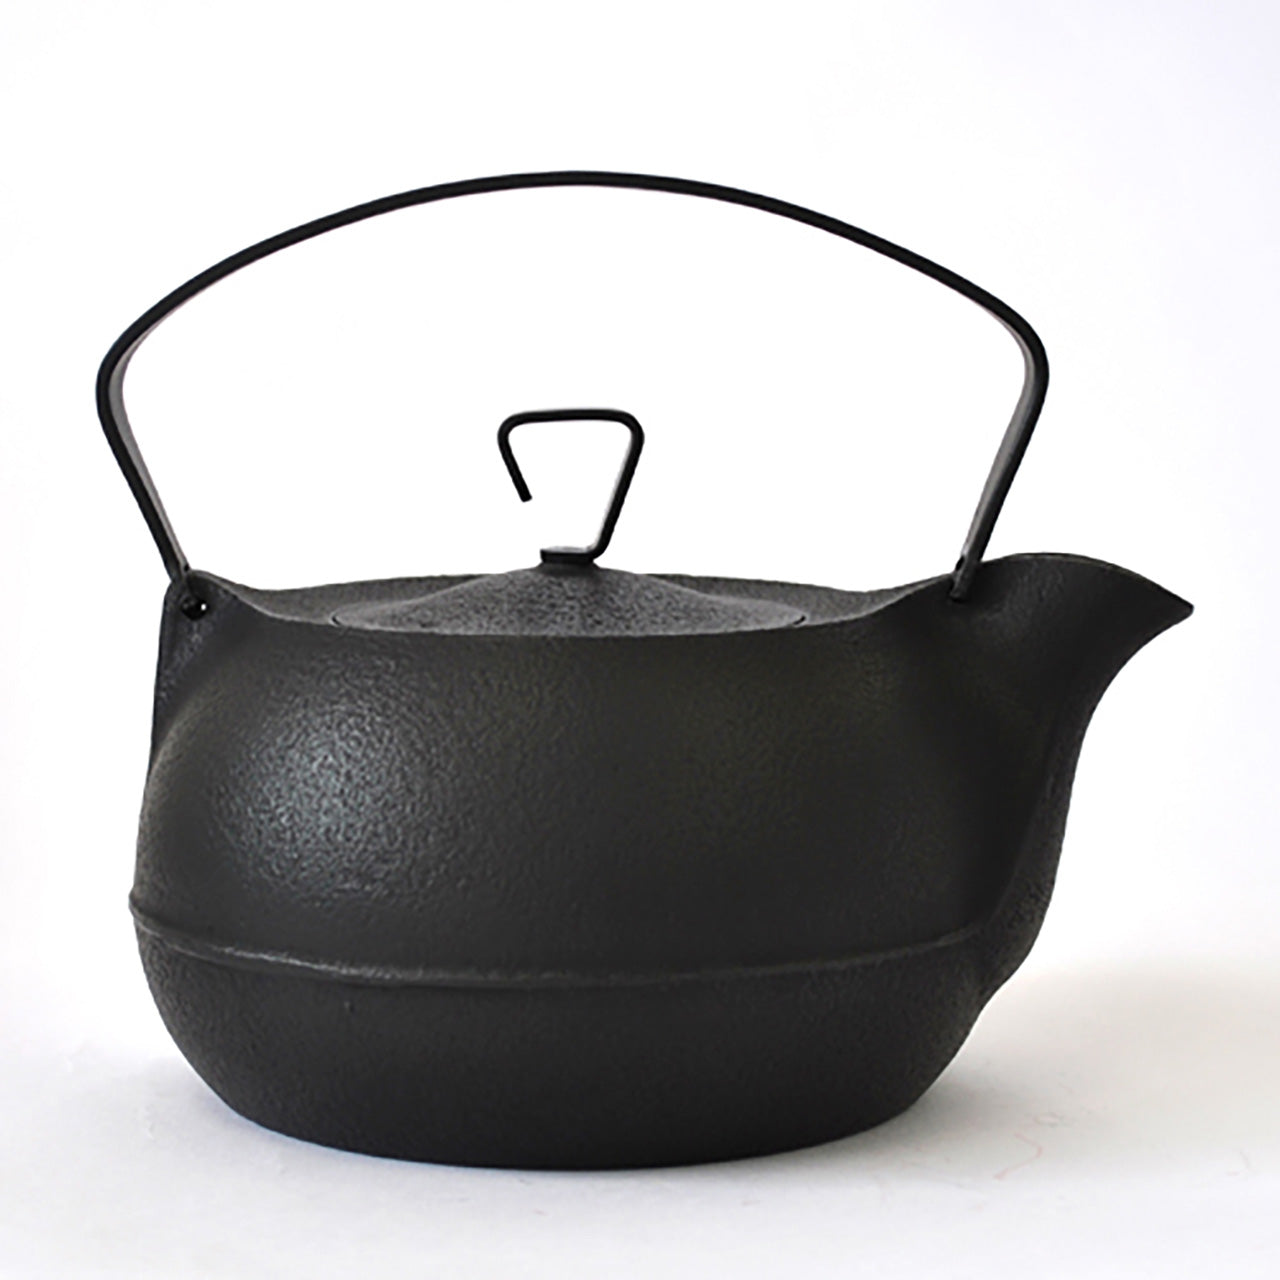 Style Selections Black Cast Iron Kettle Steamer at